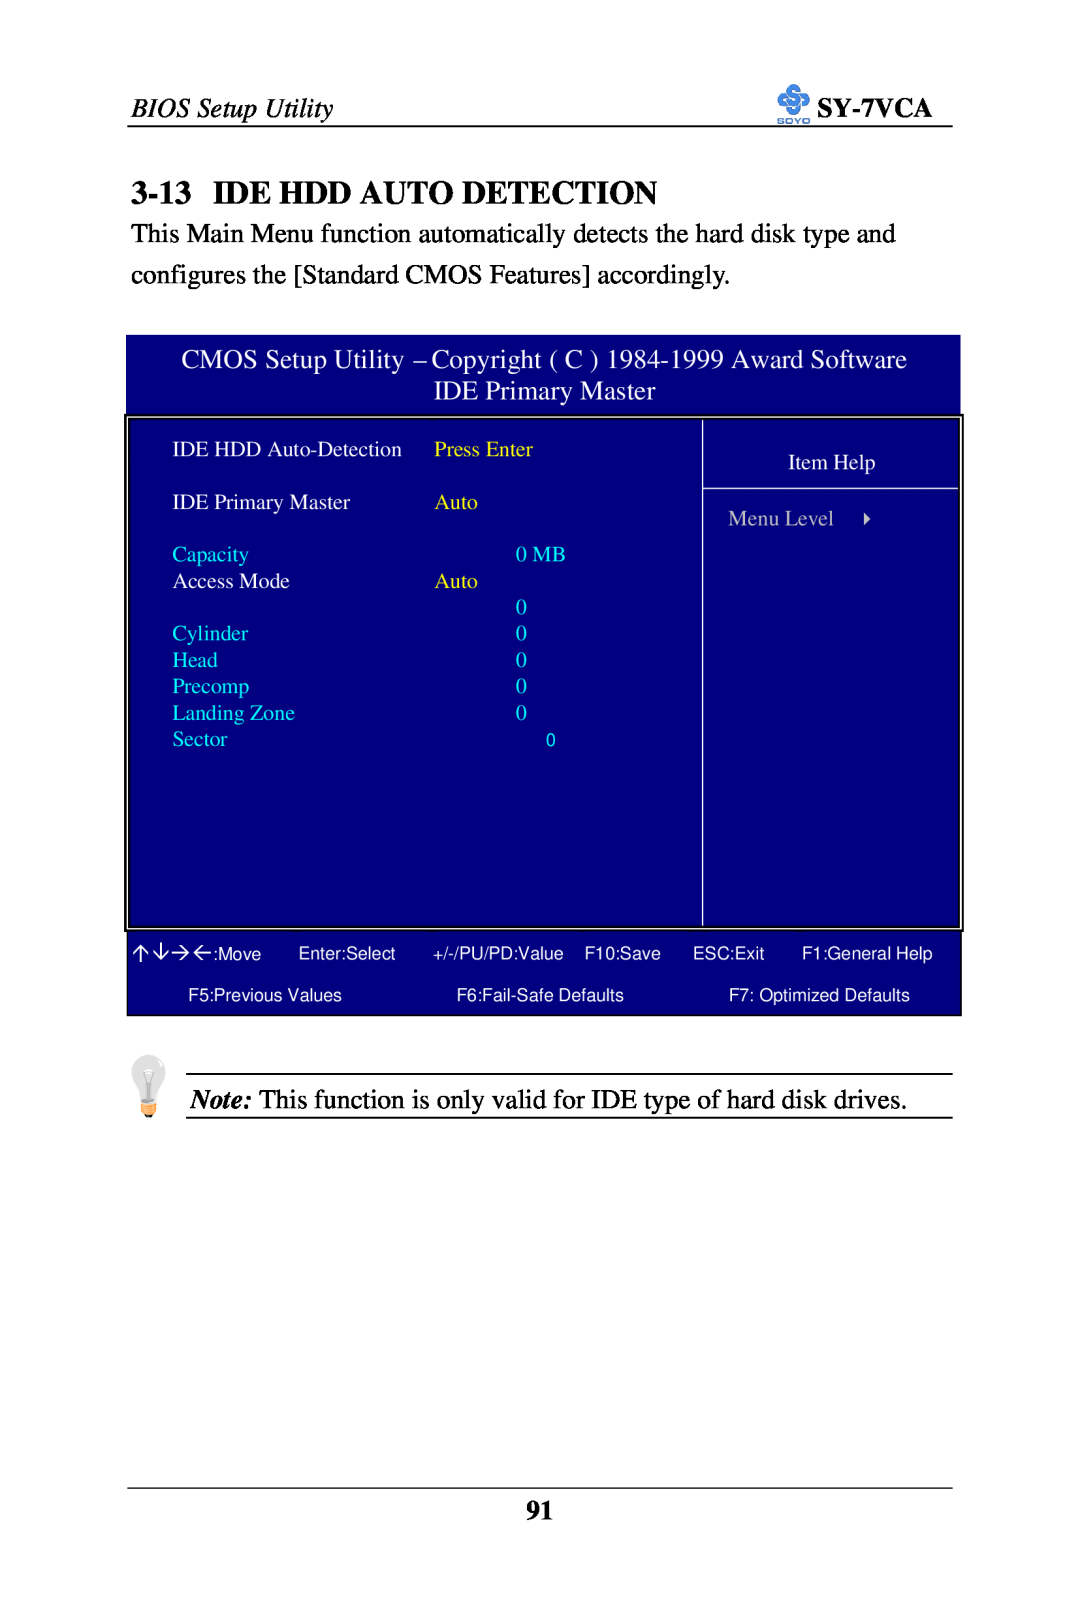 SOYO SY-7VCA Ide Hdd Auto Detection, IDE Primary Master, CMOS Setup Utility - Copyright C 1984-1999 Award Software 